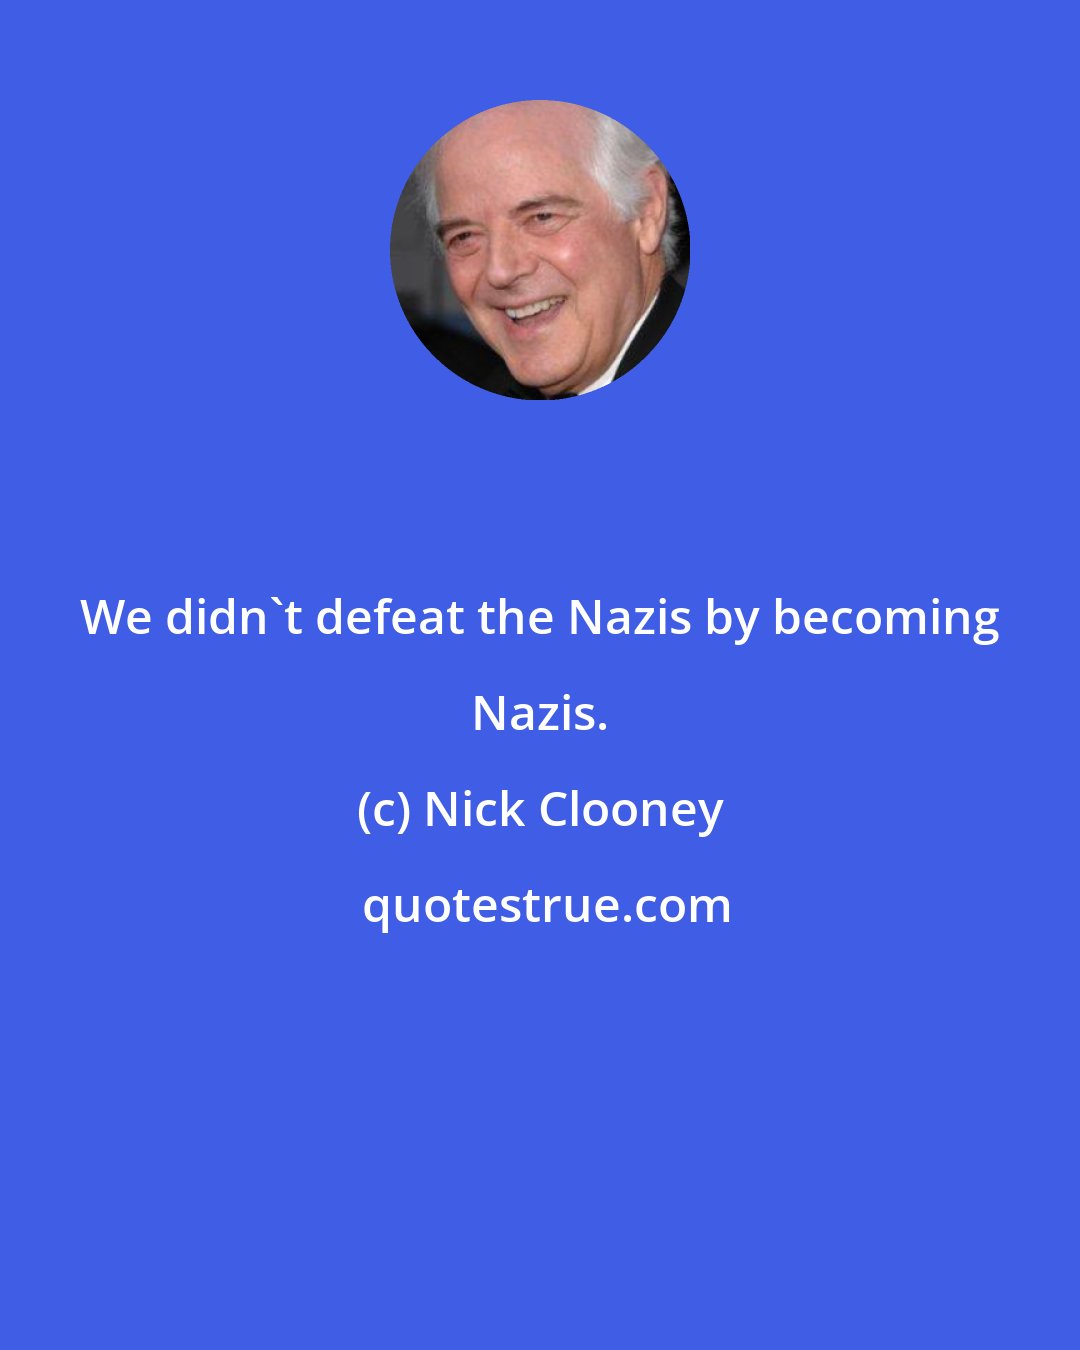 Nick Clooney: We didn't defeat the Nazis by becoming Nazis.